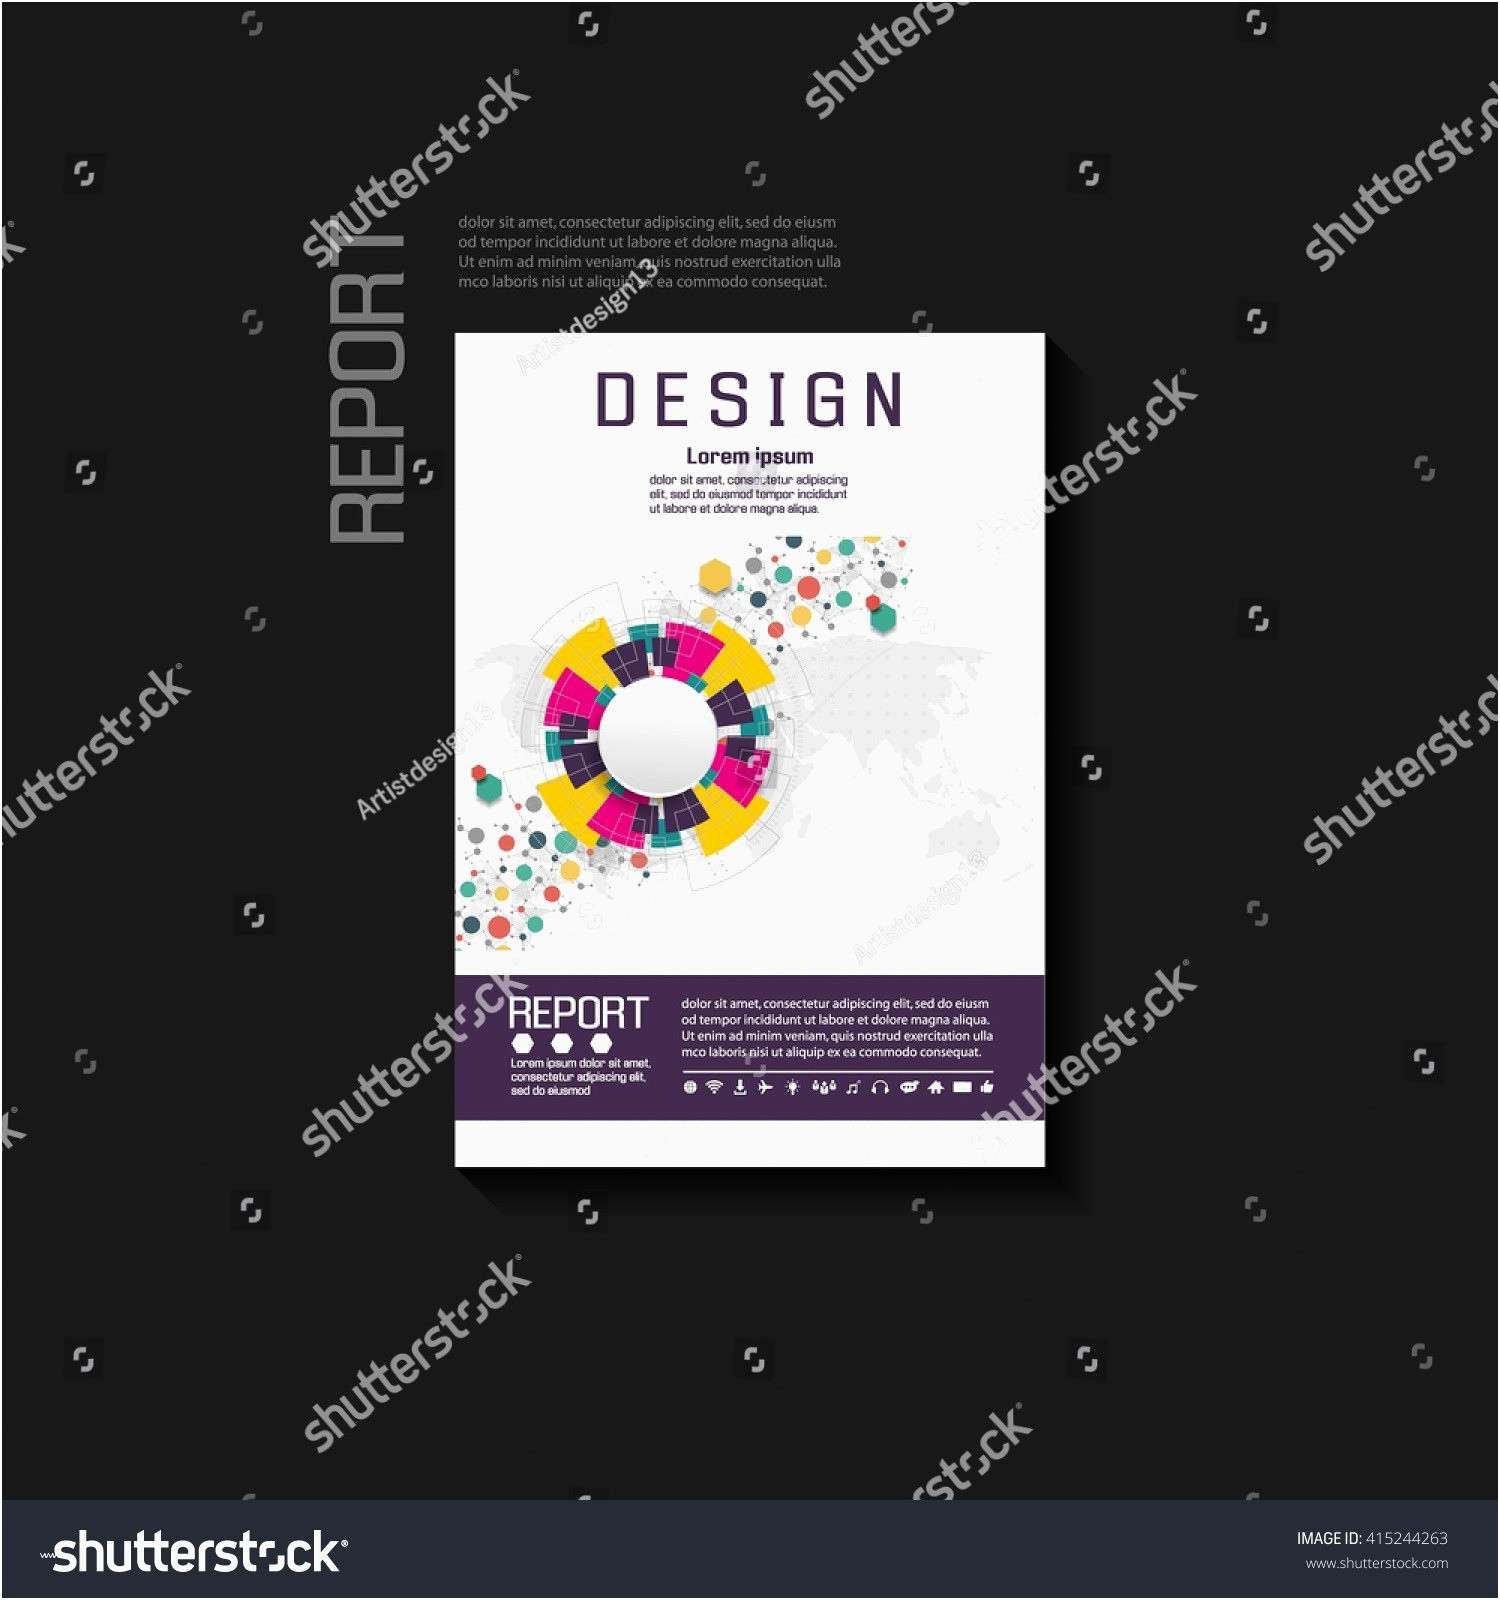 Business Cards For Teachers Templates Free – Caquetapositivo With Business Cards For Teachers Templates Free